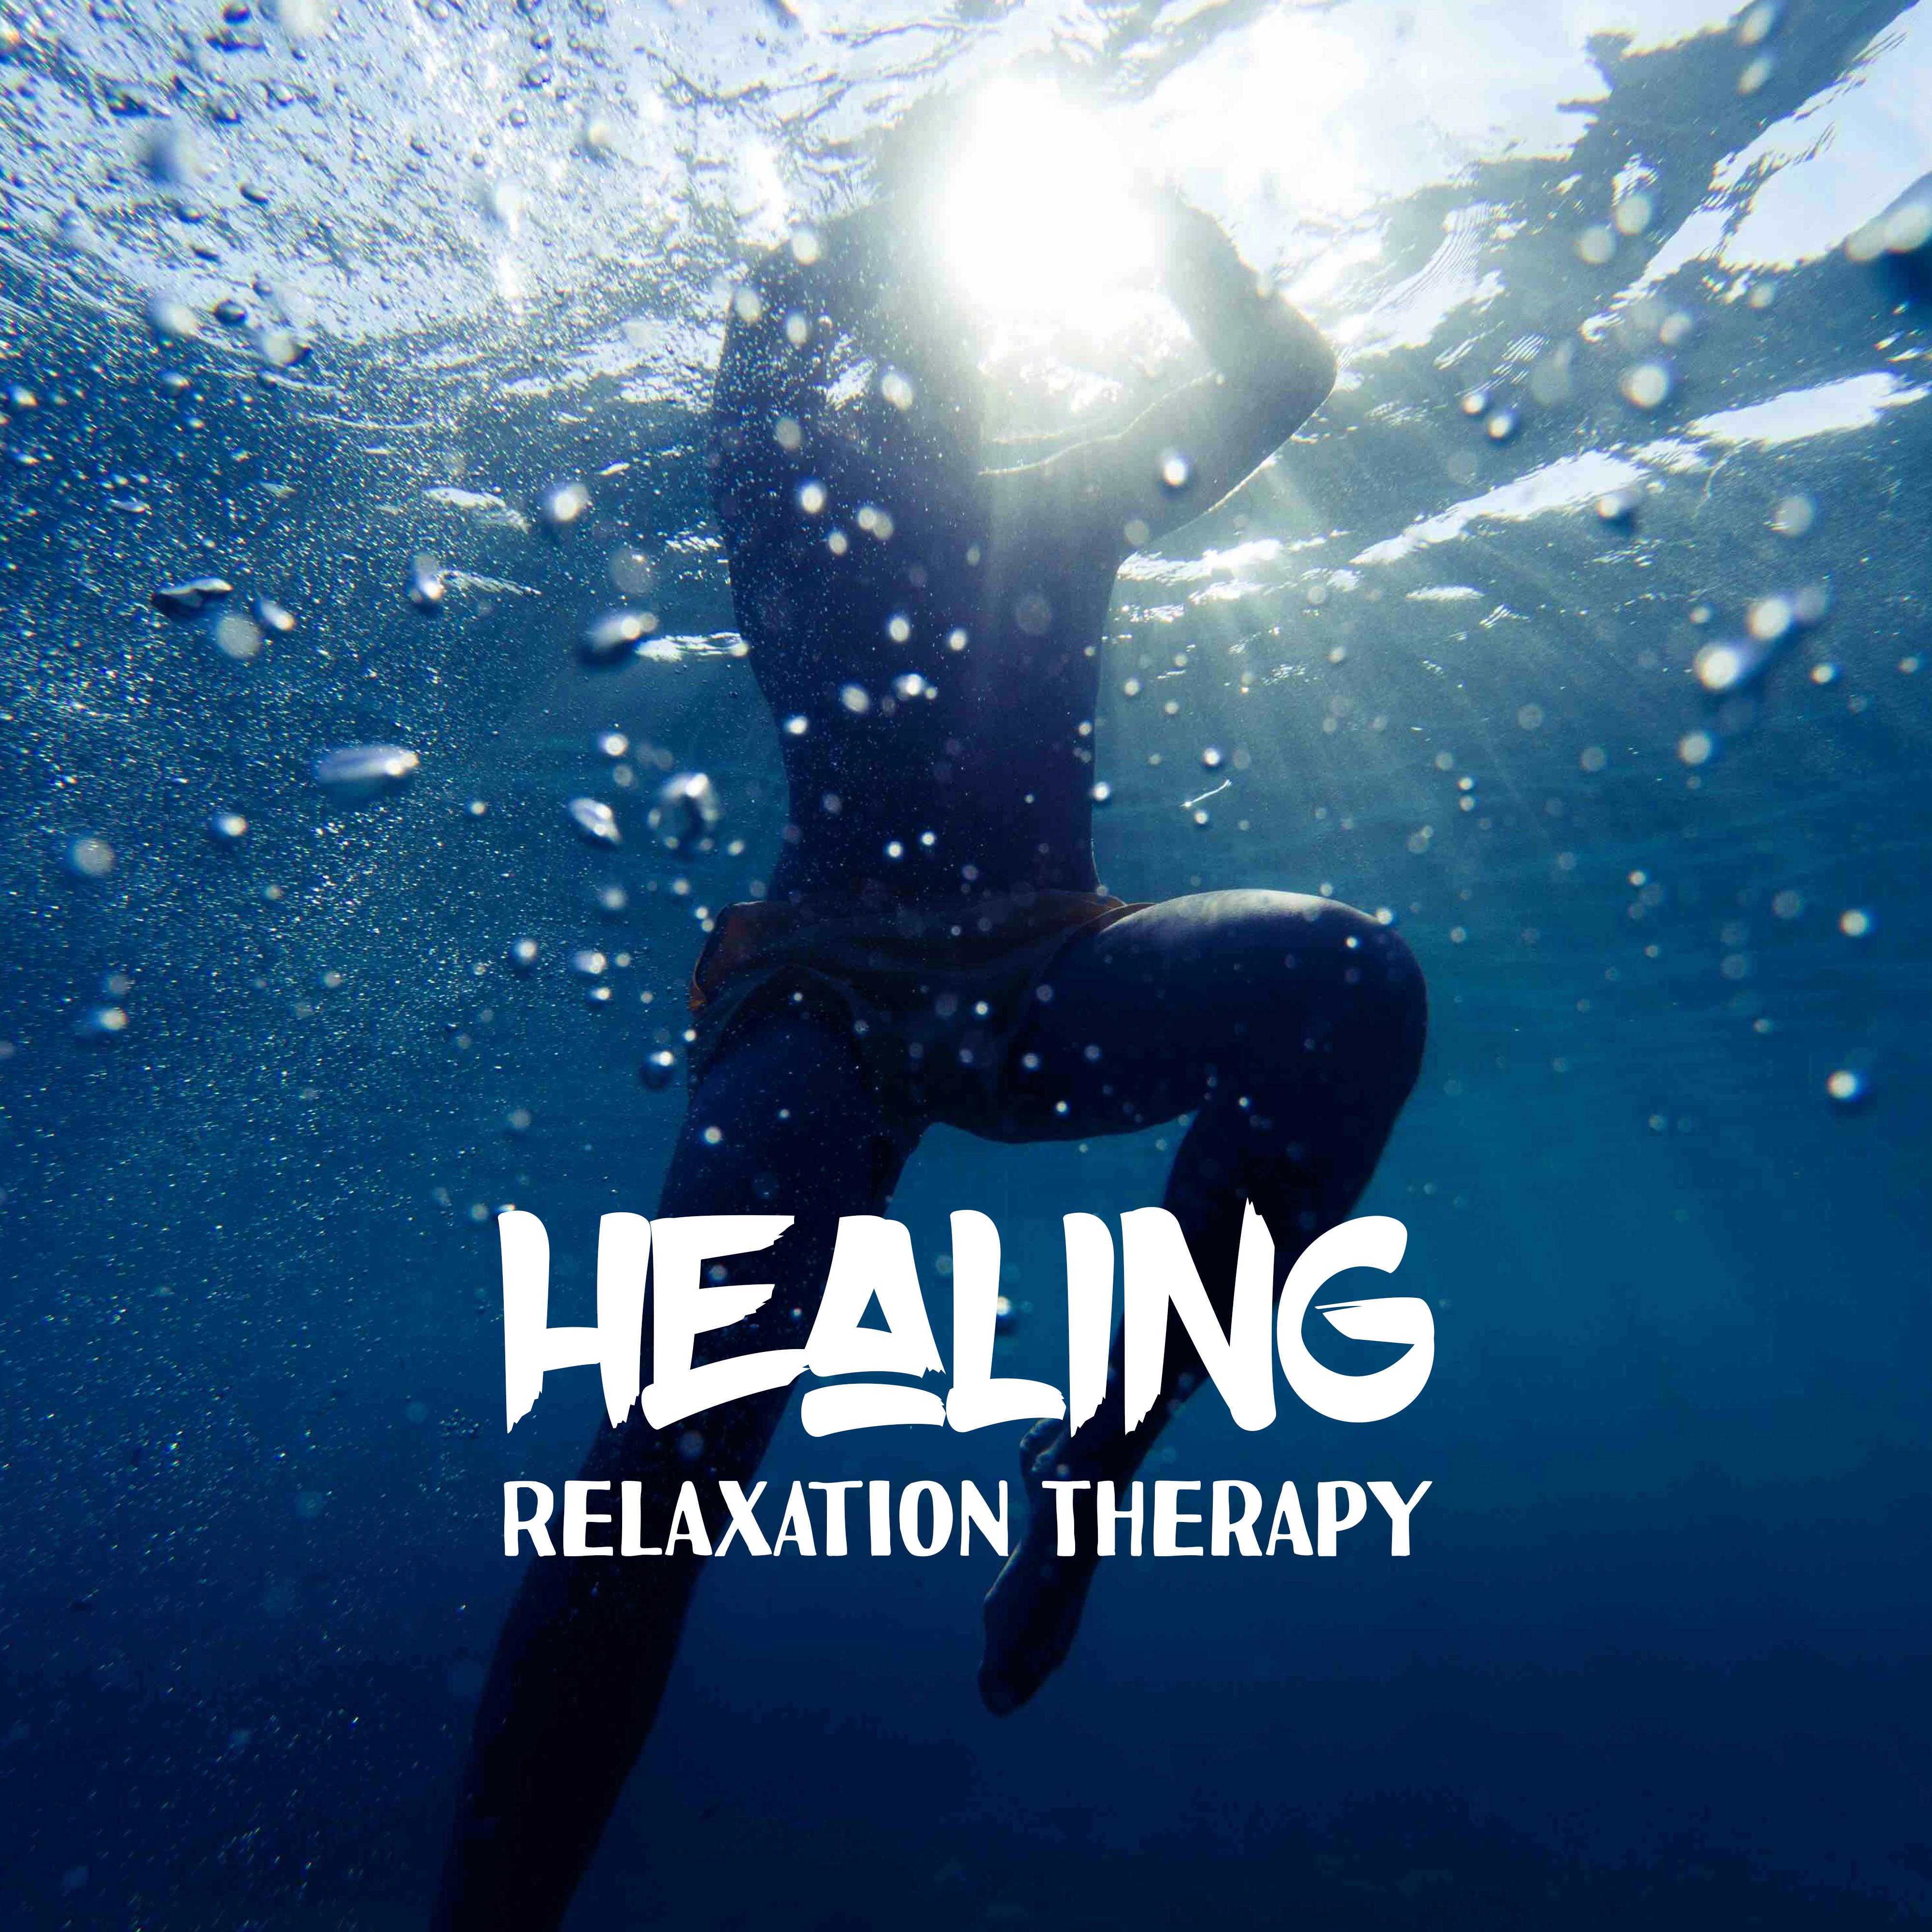 Healing Relaxation Therapy